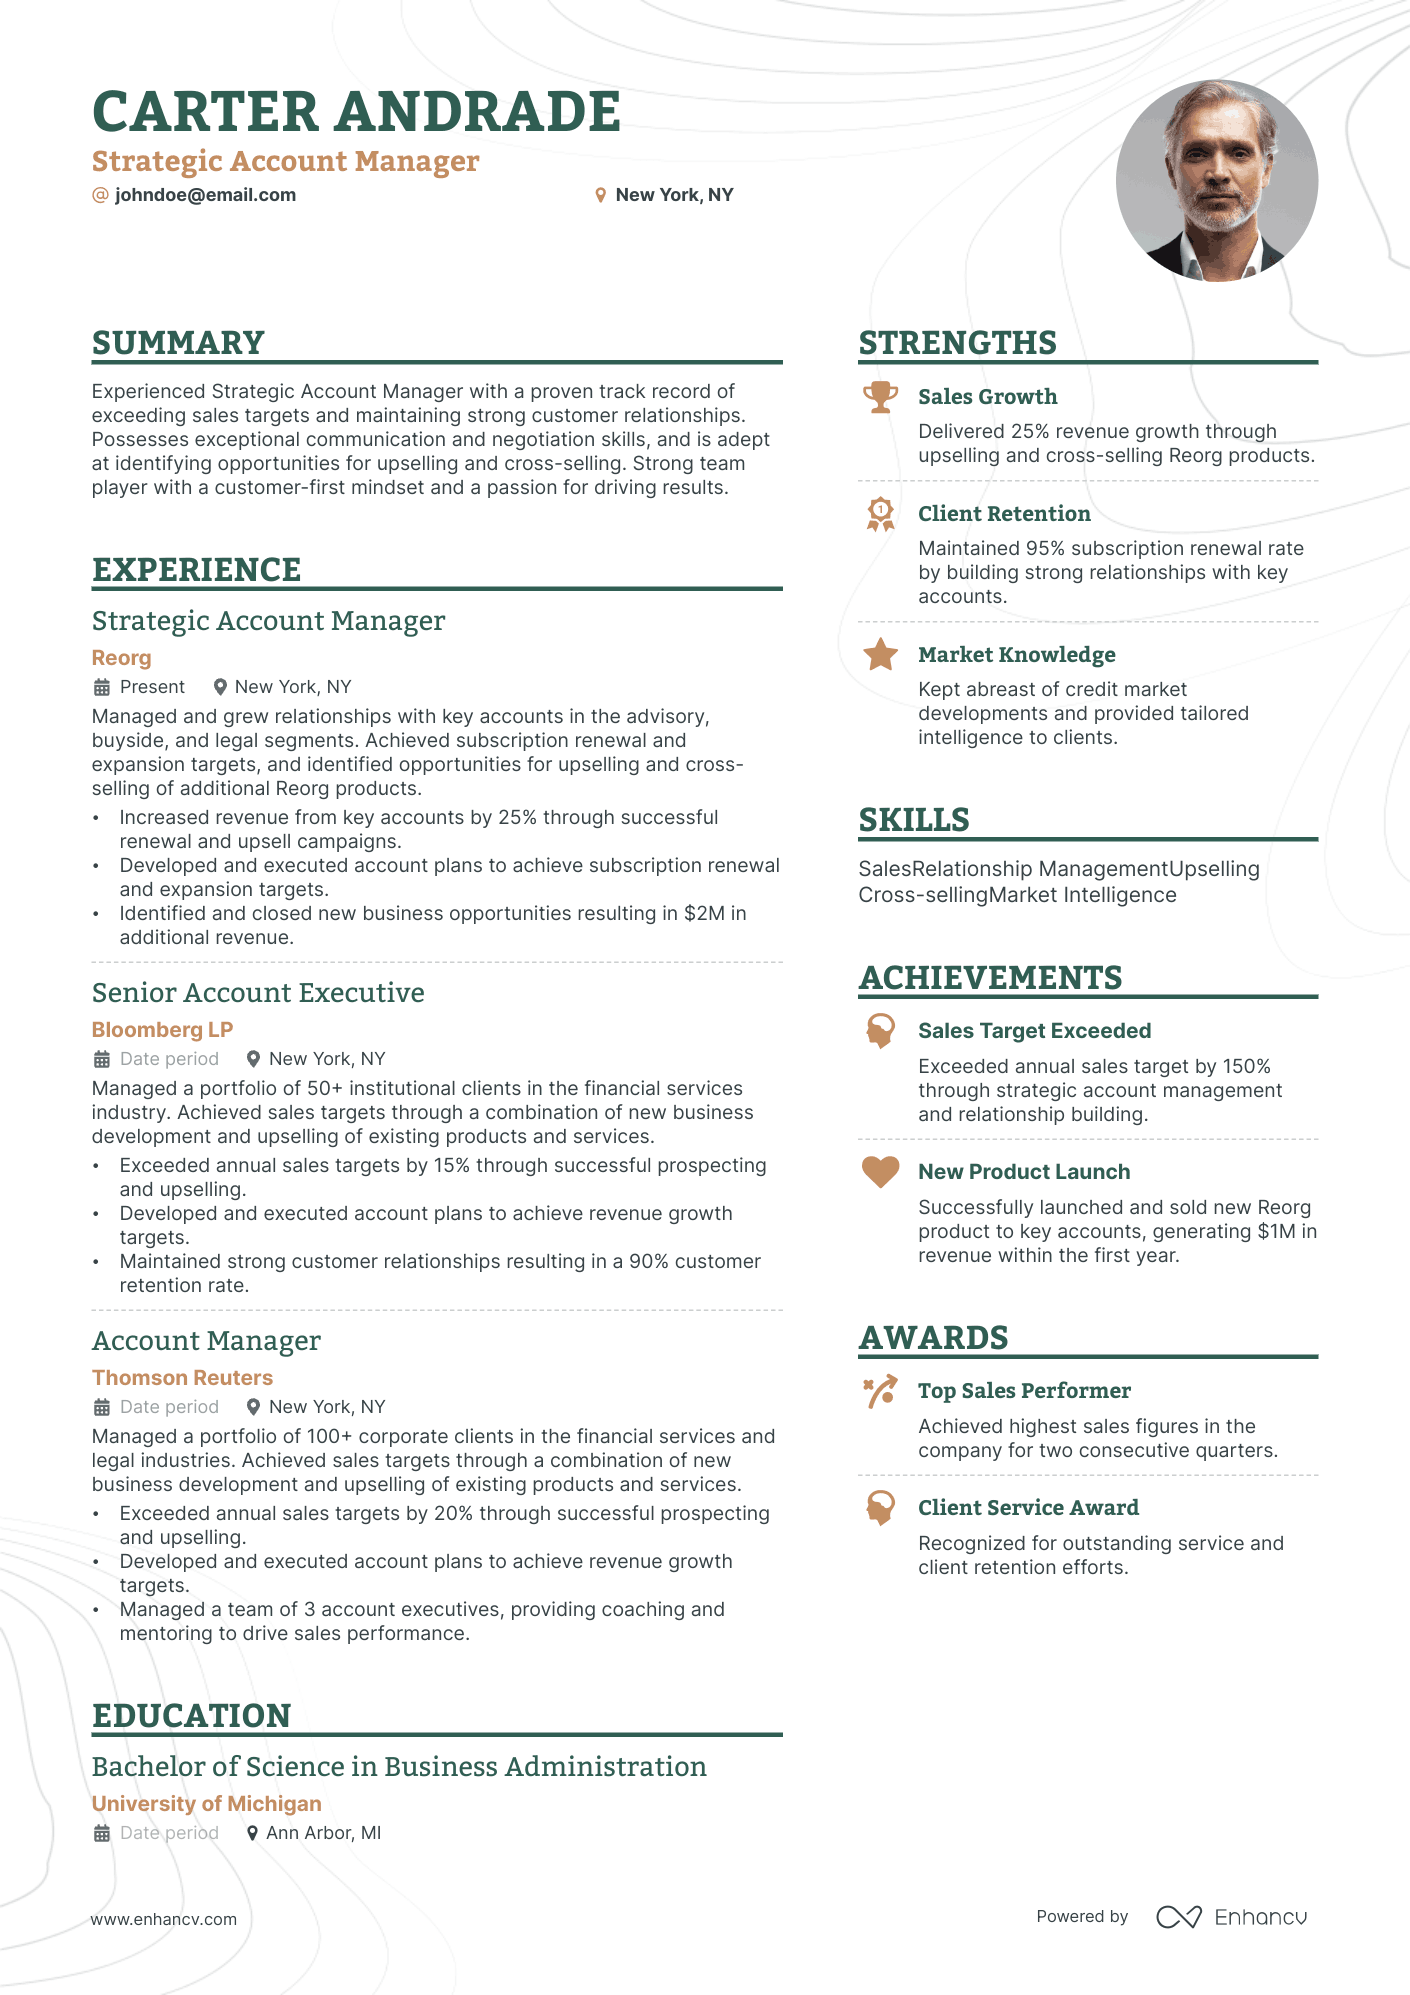 Strategic Account Manager resume example